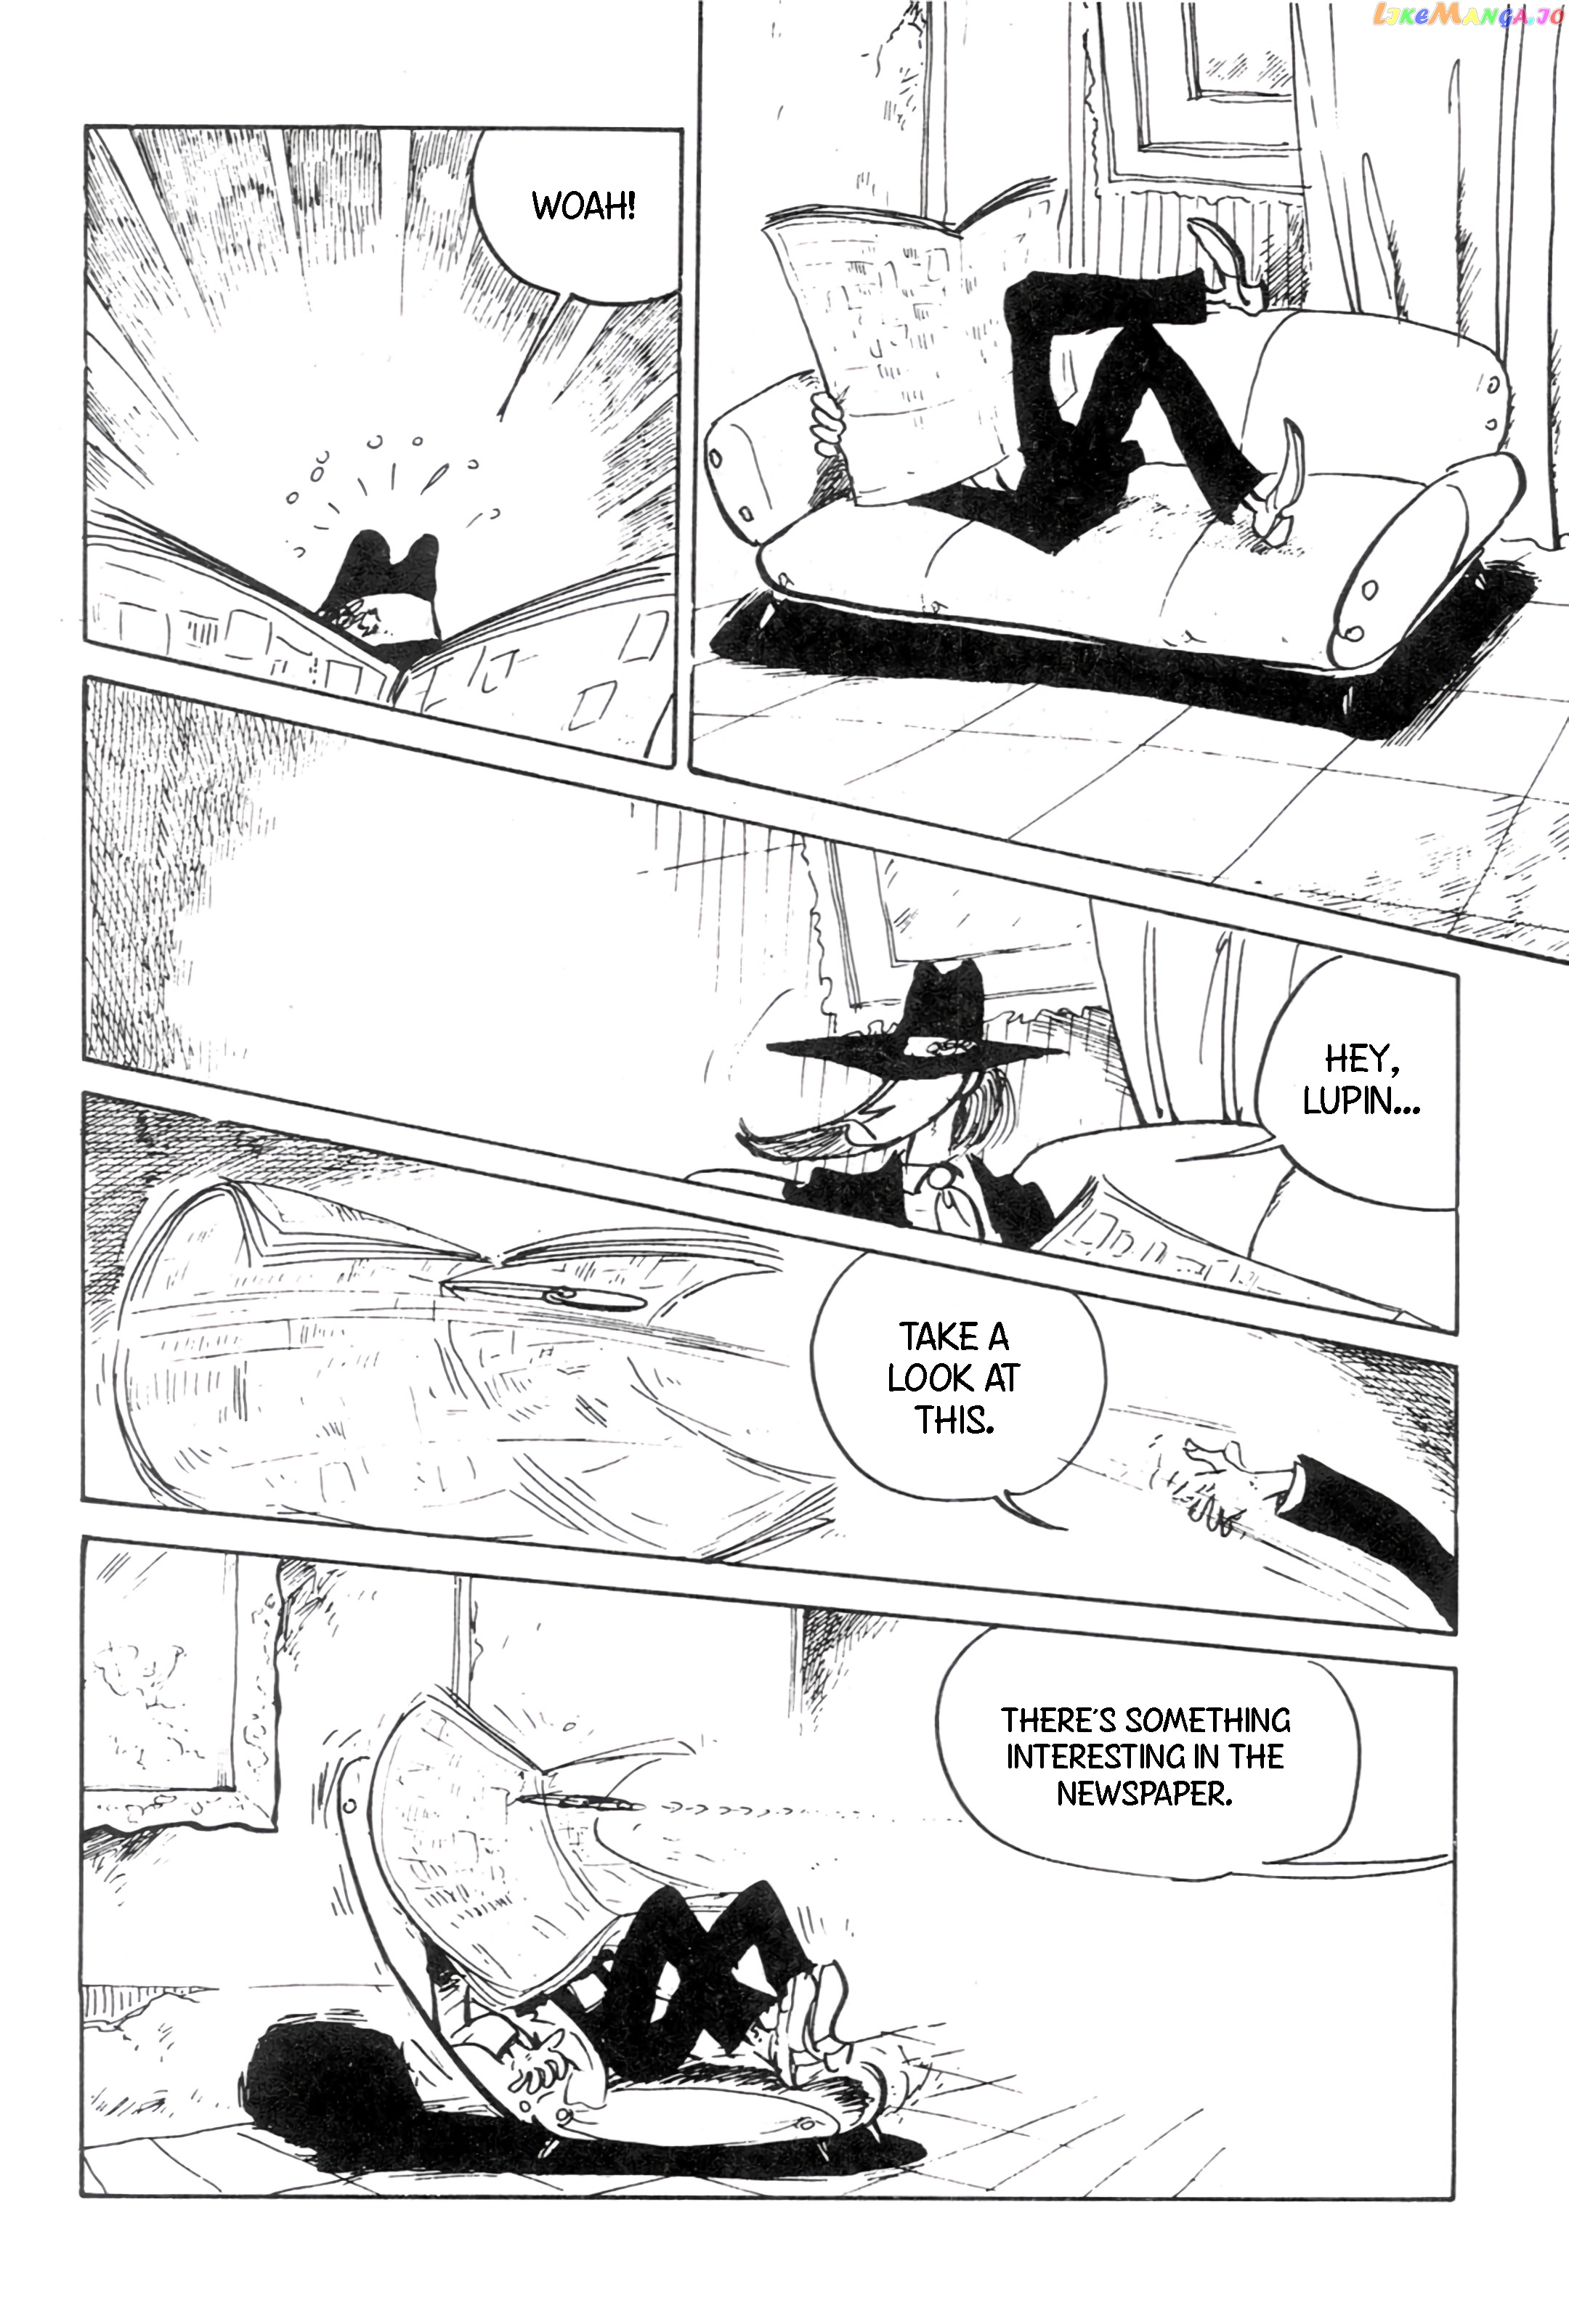 Lupin III: World’s Most Wanted chapter 134 - page 2